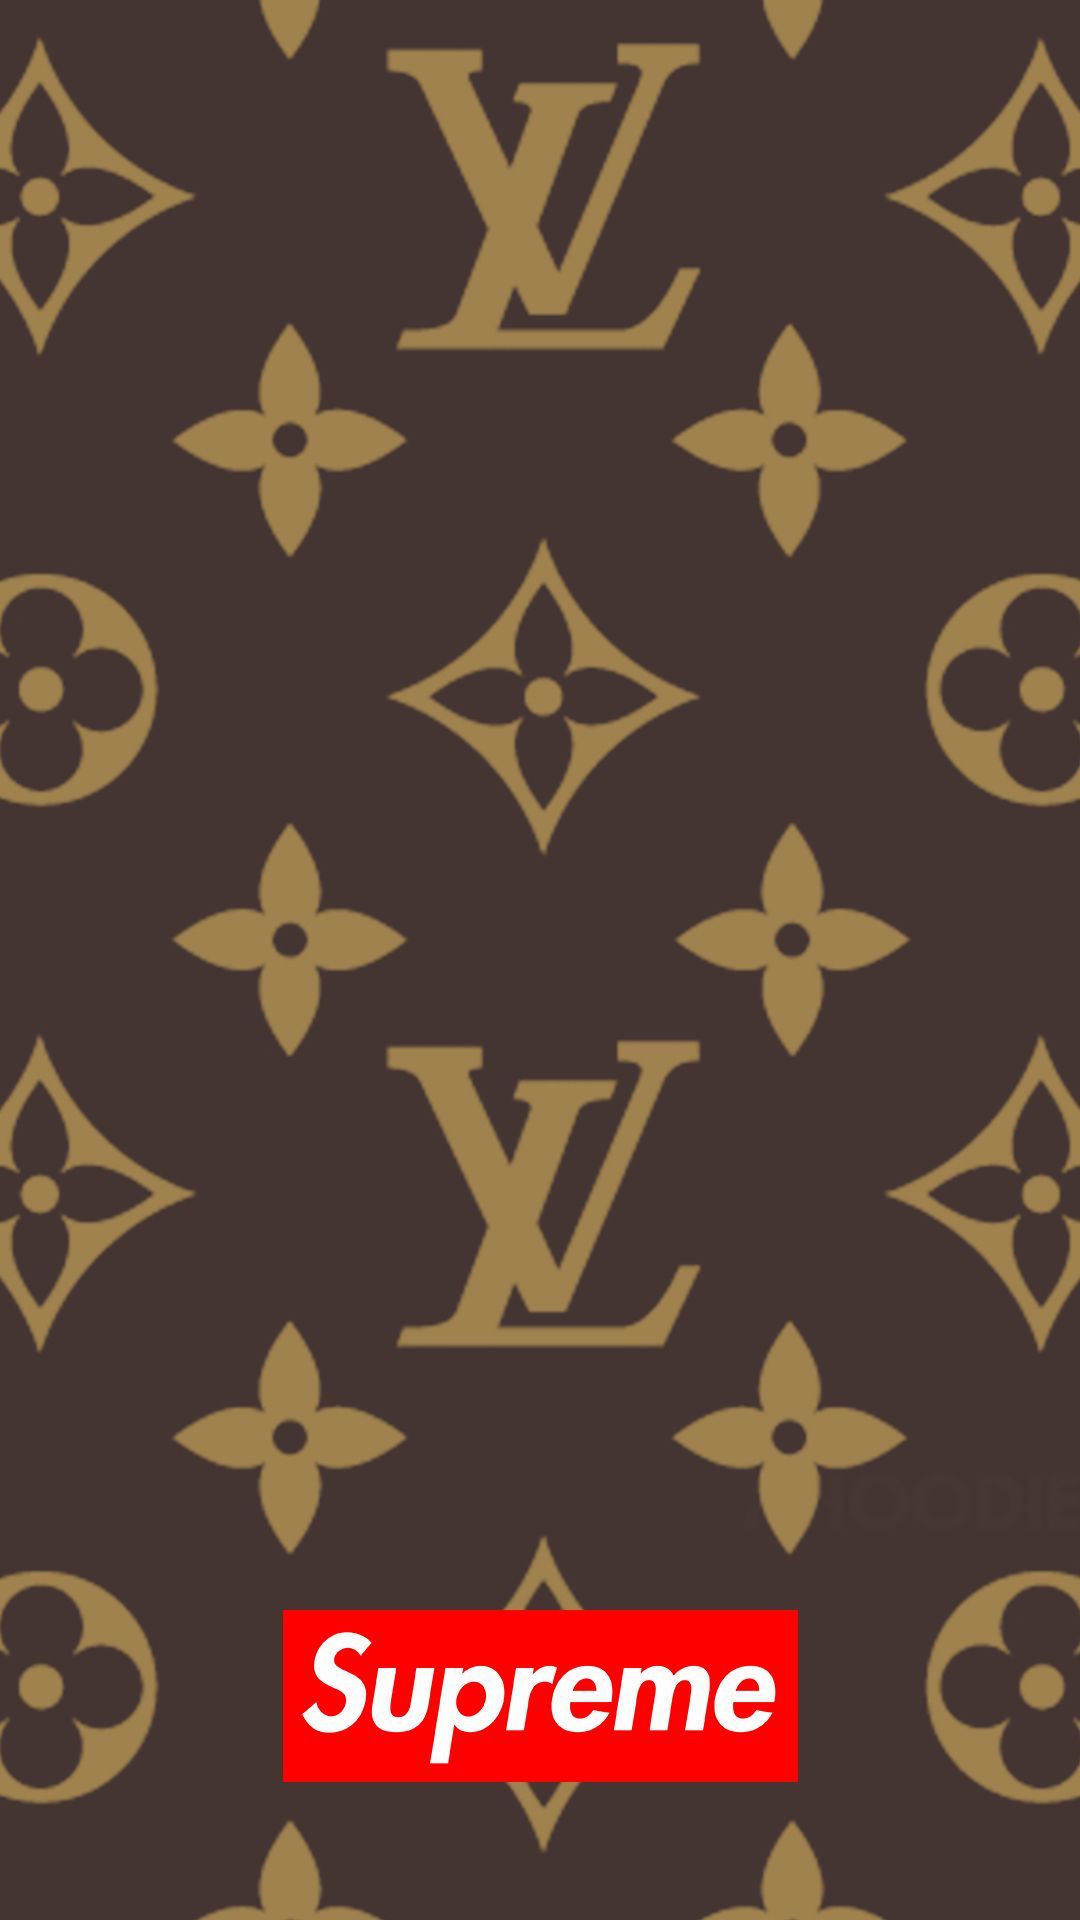 Download Supreme LV Wallpaper by Prybz - 72 - Free on ZEDGE™️ now. Browse  millions of popular s…